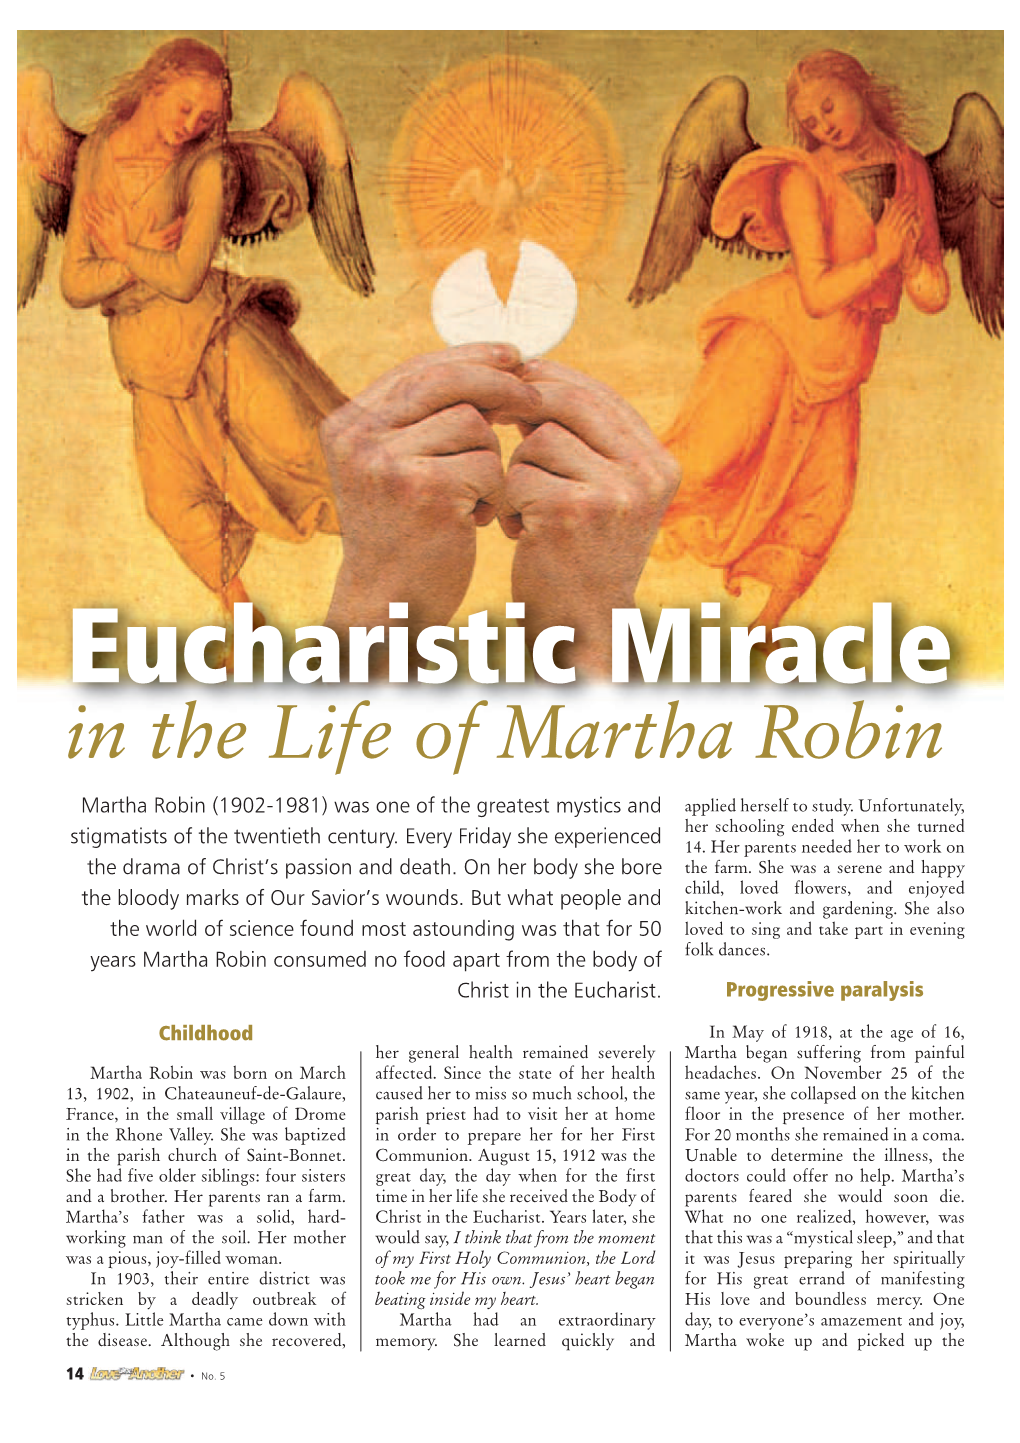 Eucharistic Miracle in the Life of Martha Robin